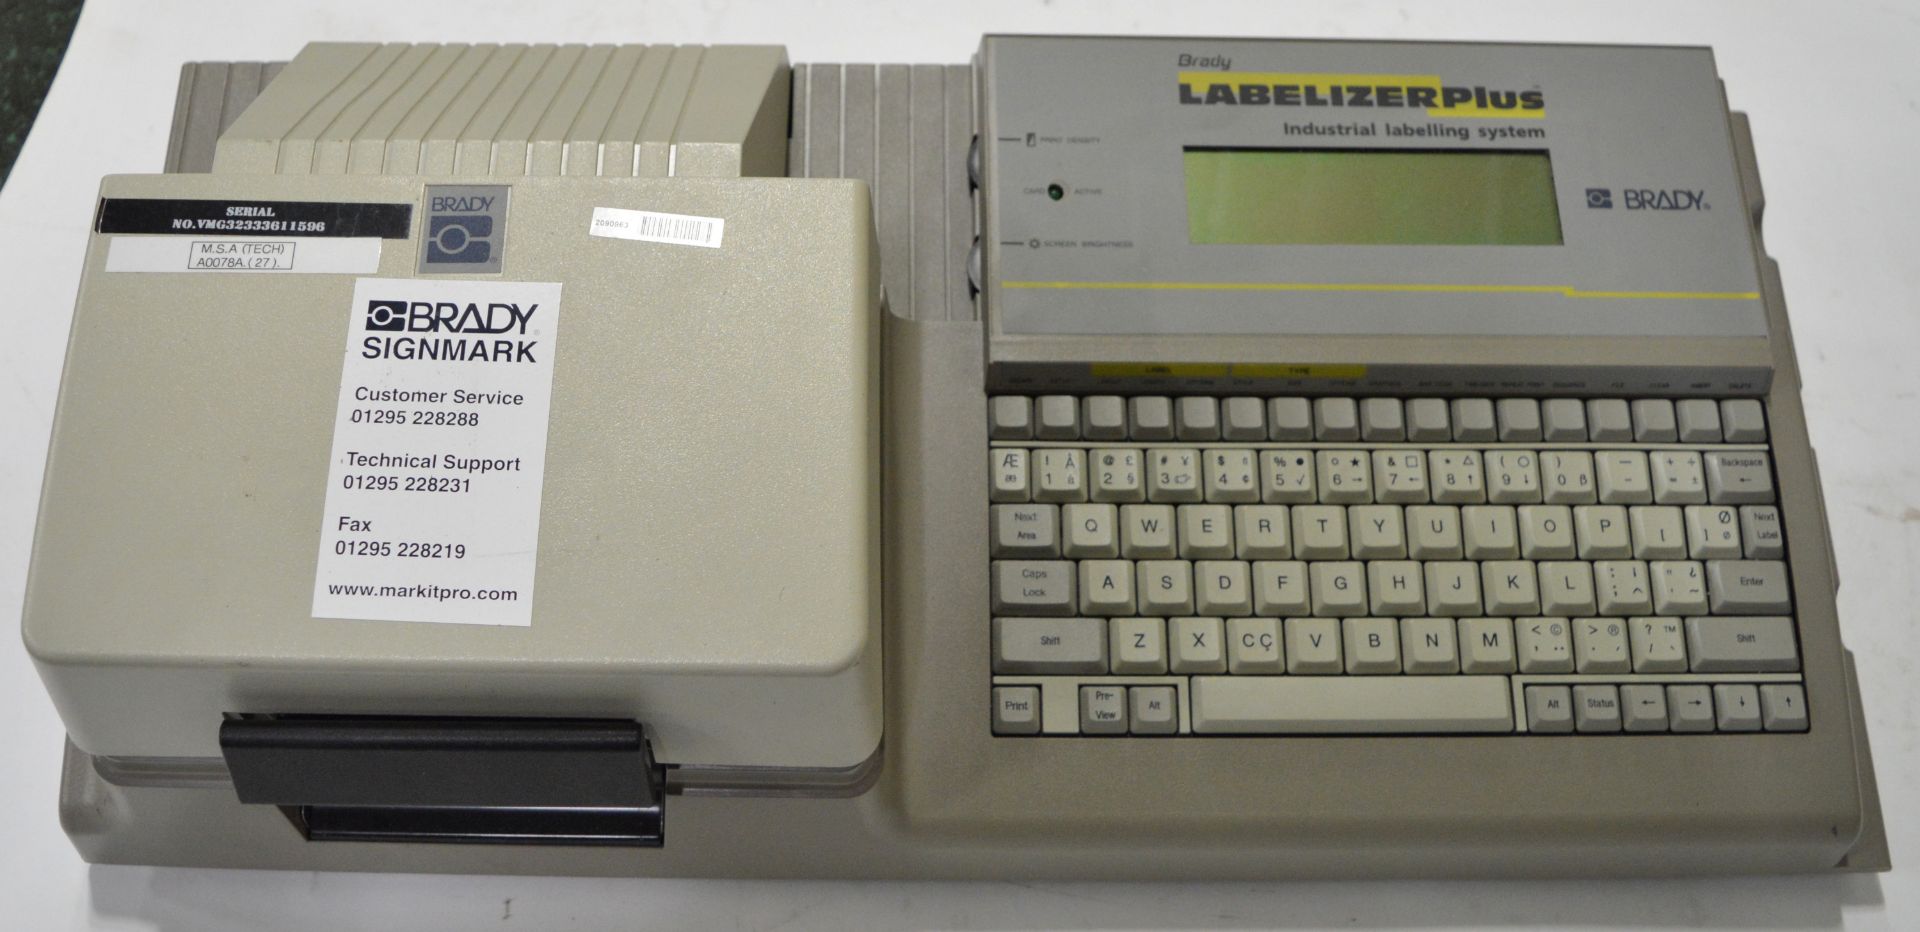 Brady Labelizer Plus Industrial Labelling Machine, 21x Boxes of Cartridges. - Image 2 of 4